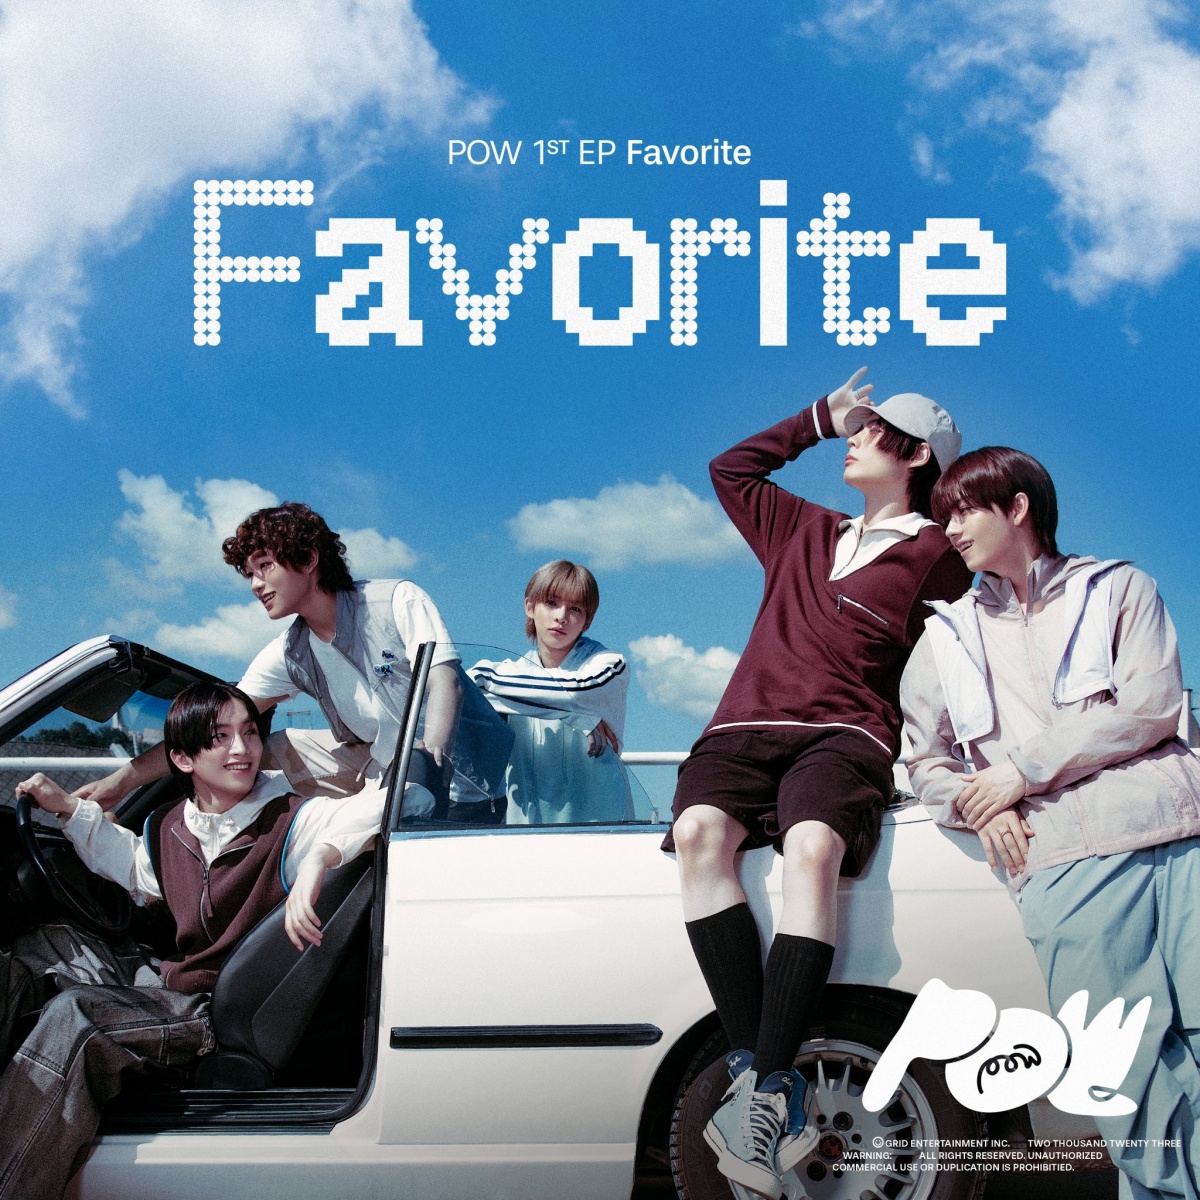 POW officially debuts on October 11th... First EP ‘Favorite’ released